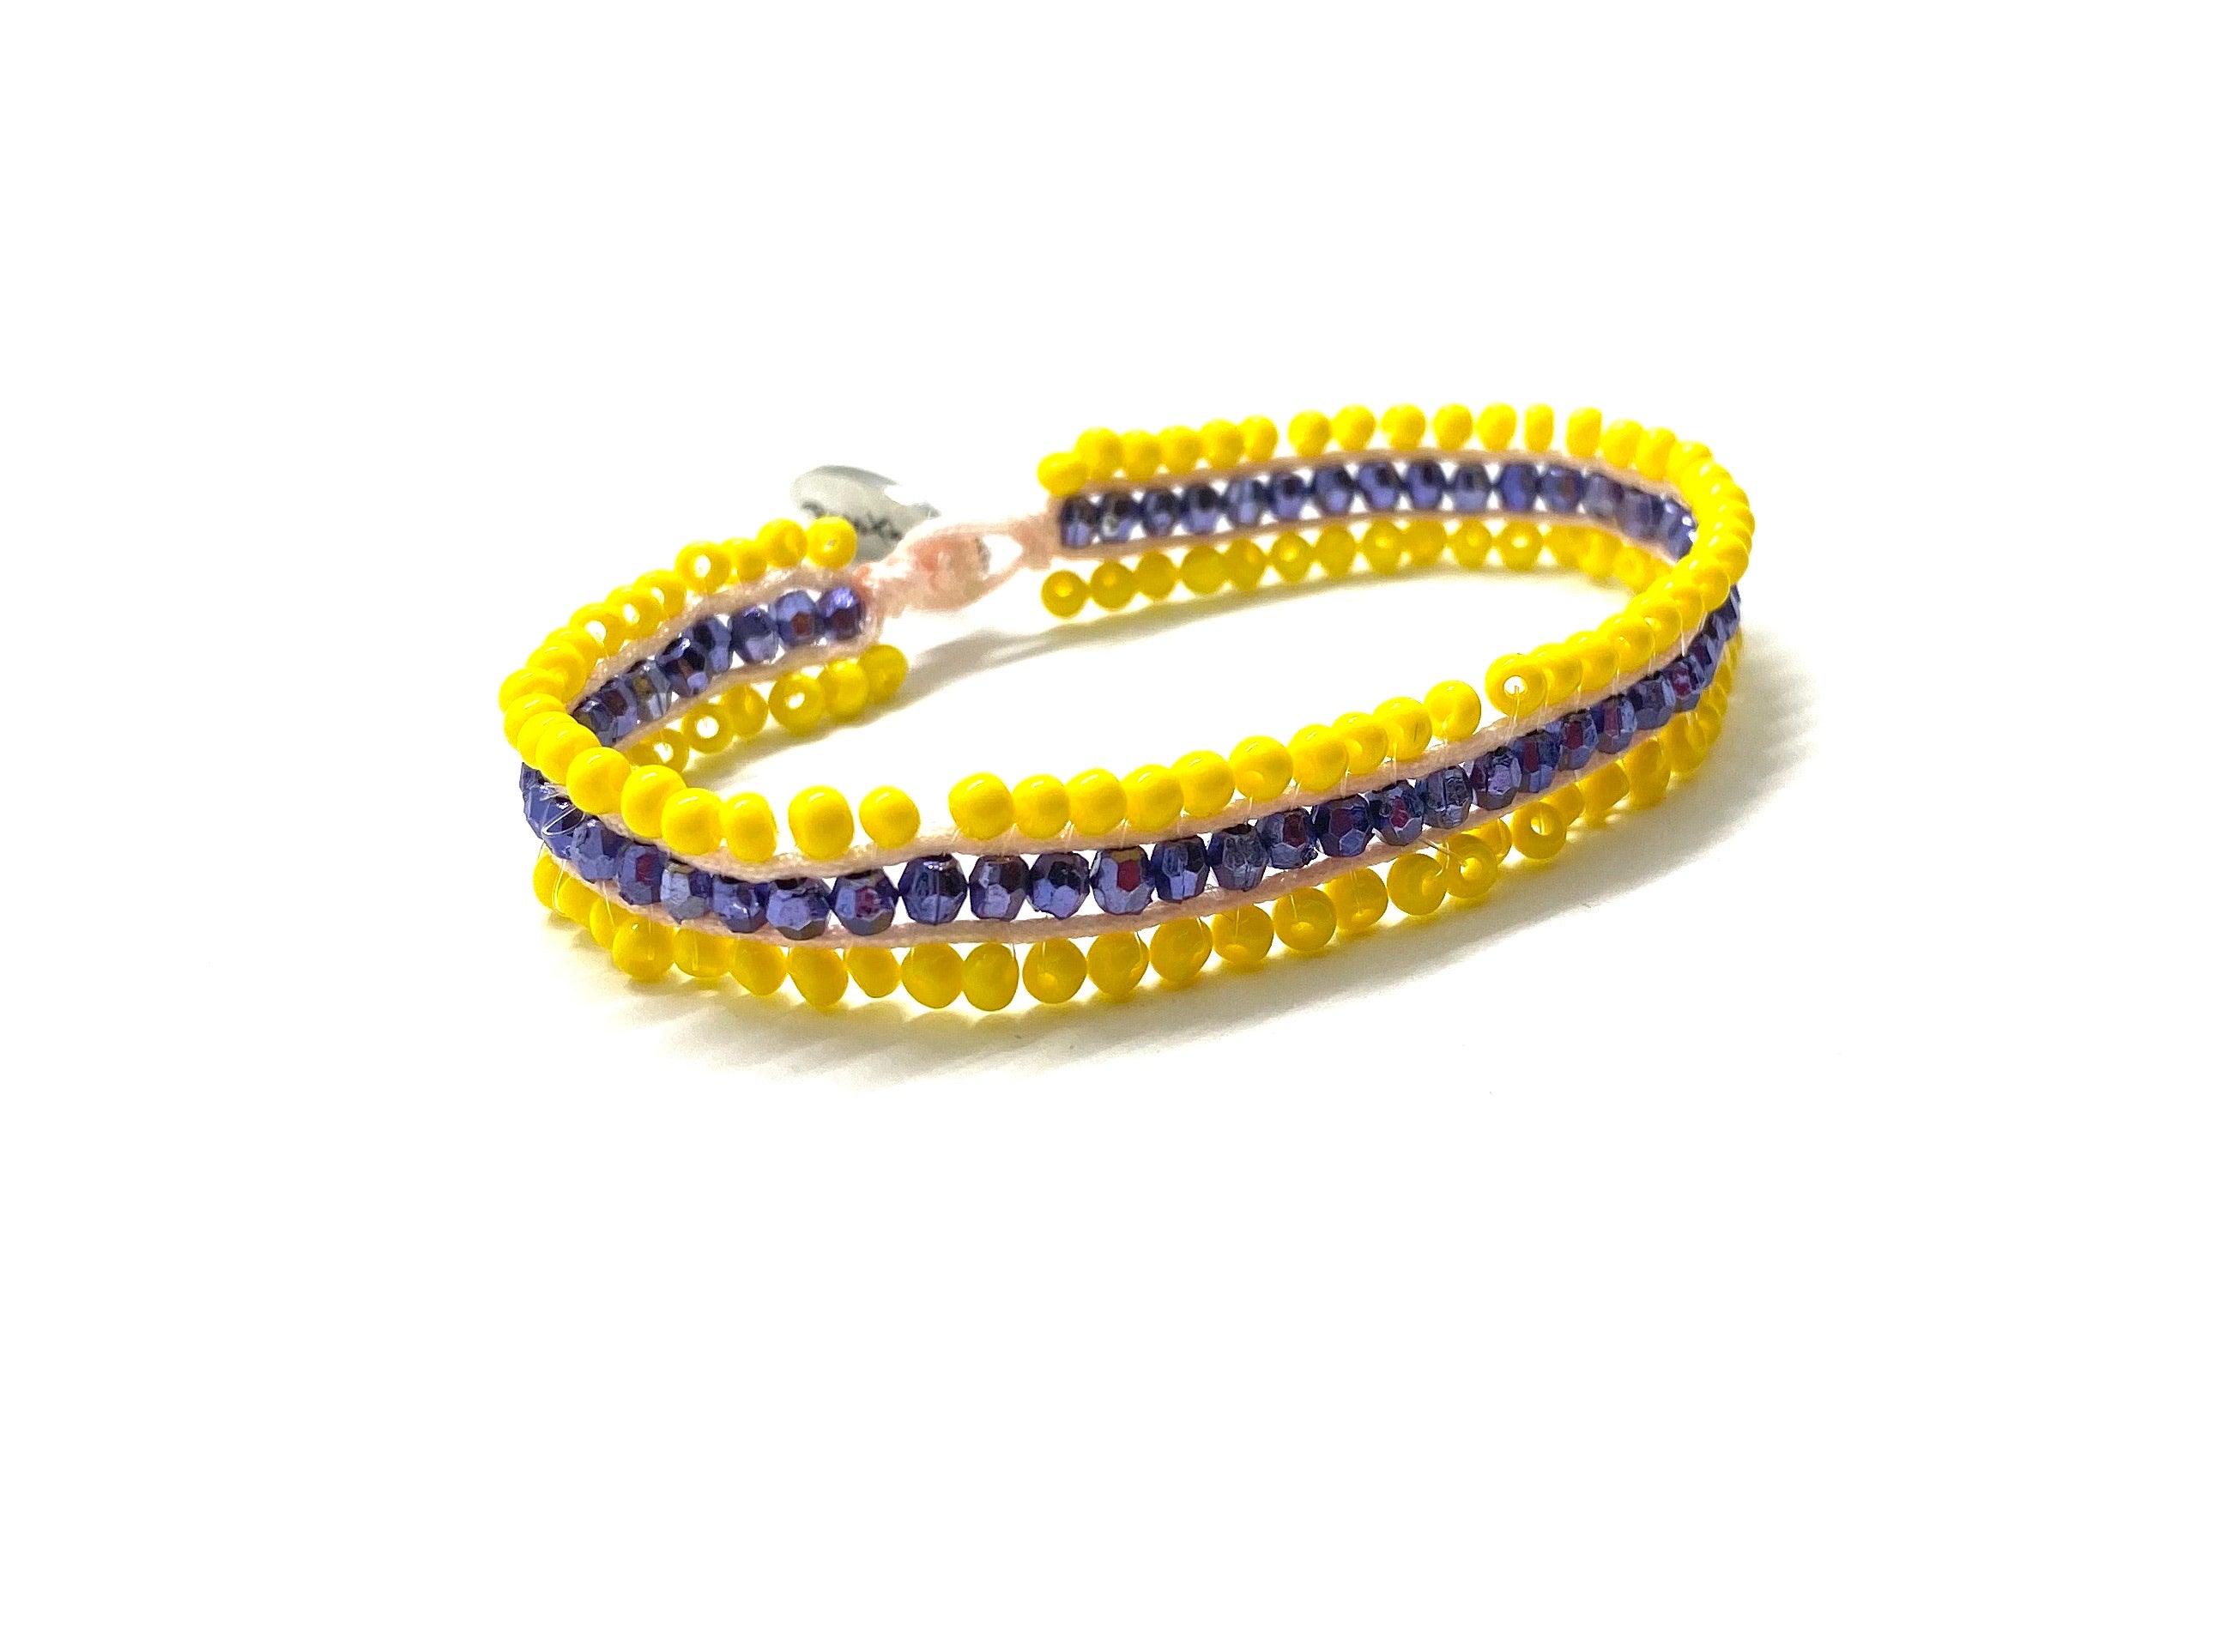 Beaded bracelet, yellow and purple seed beads and yellow cord.